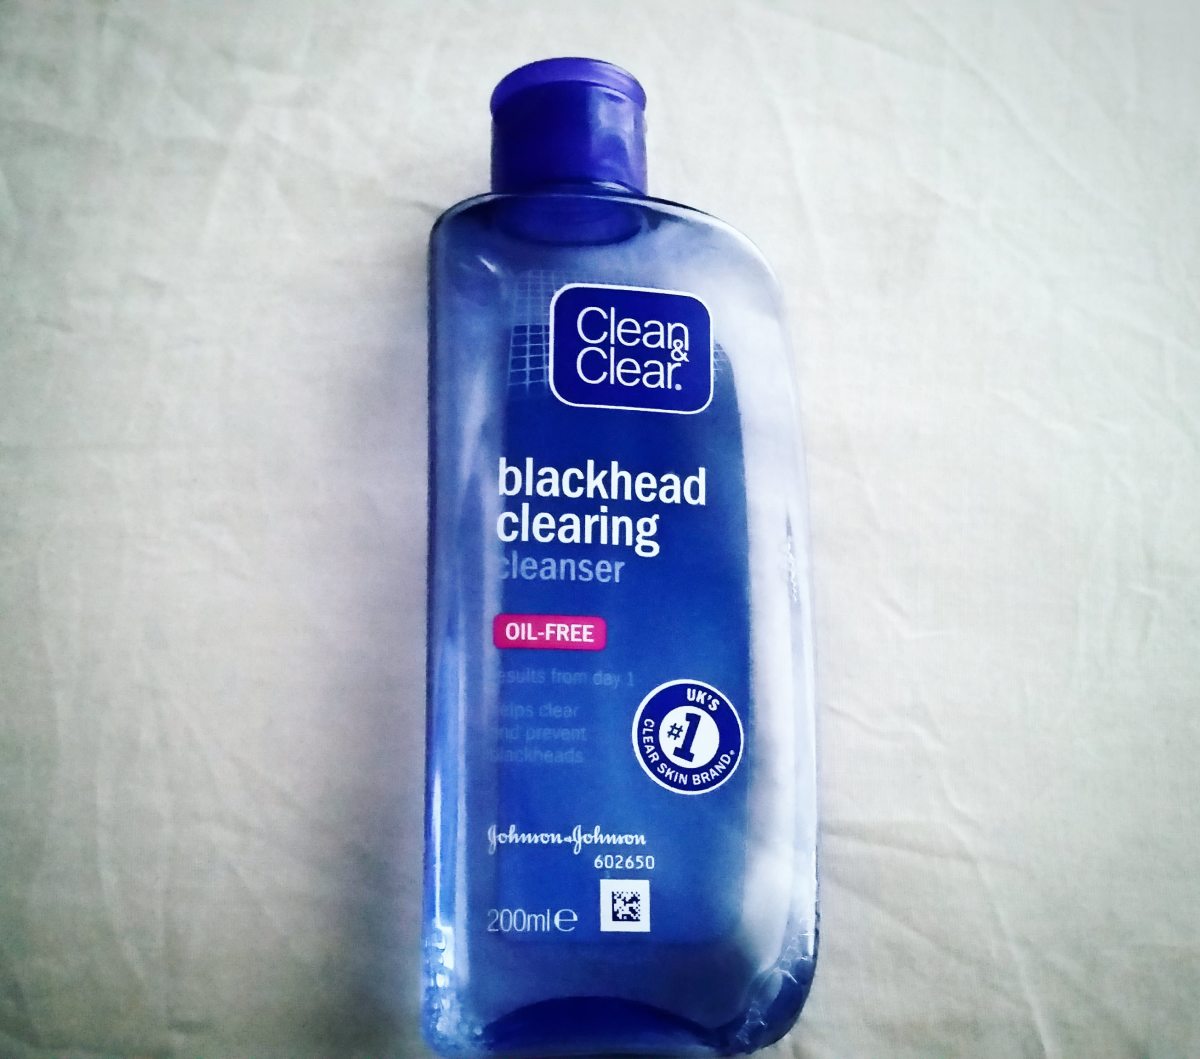 My Review of Clean & Clear Blackhead Clearing Cleanser